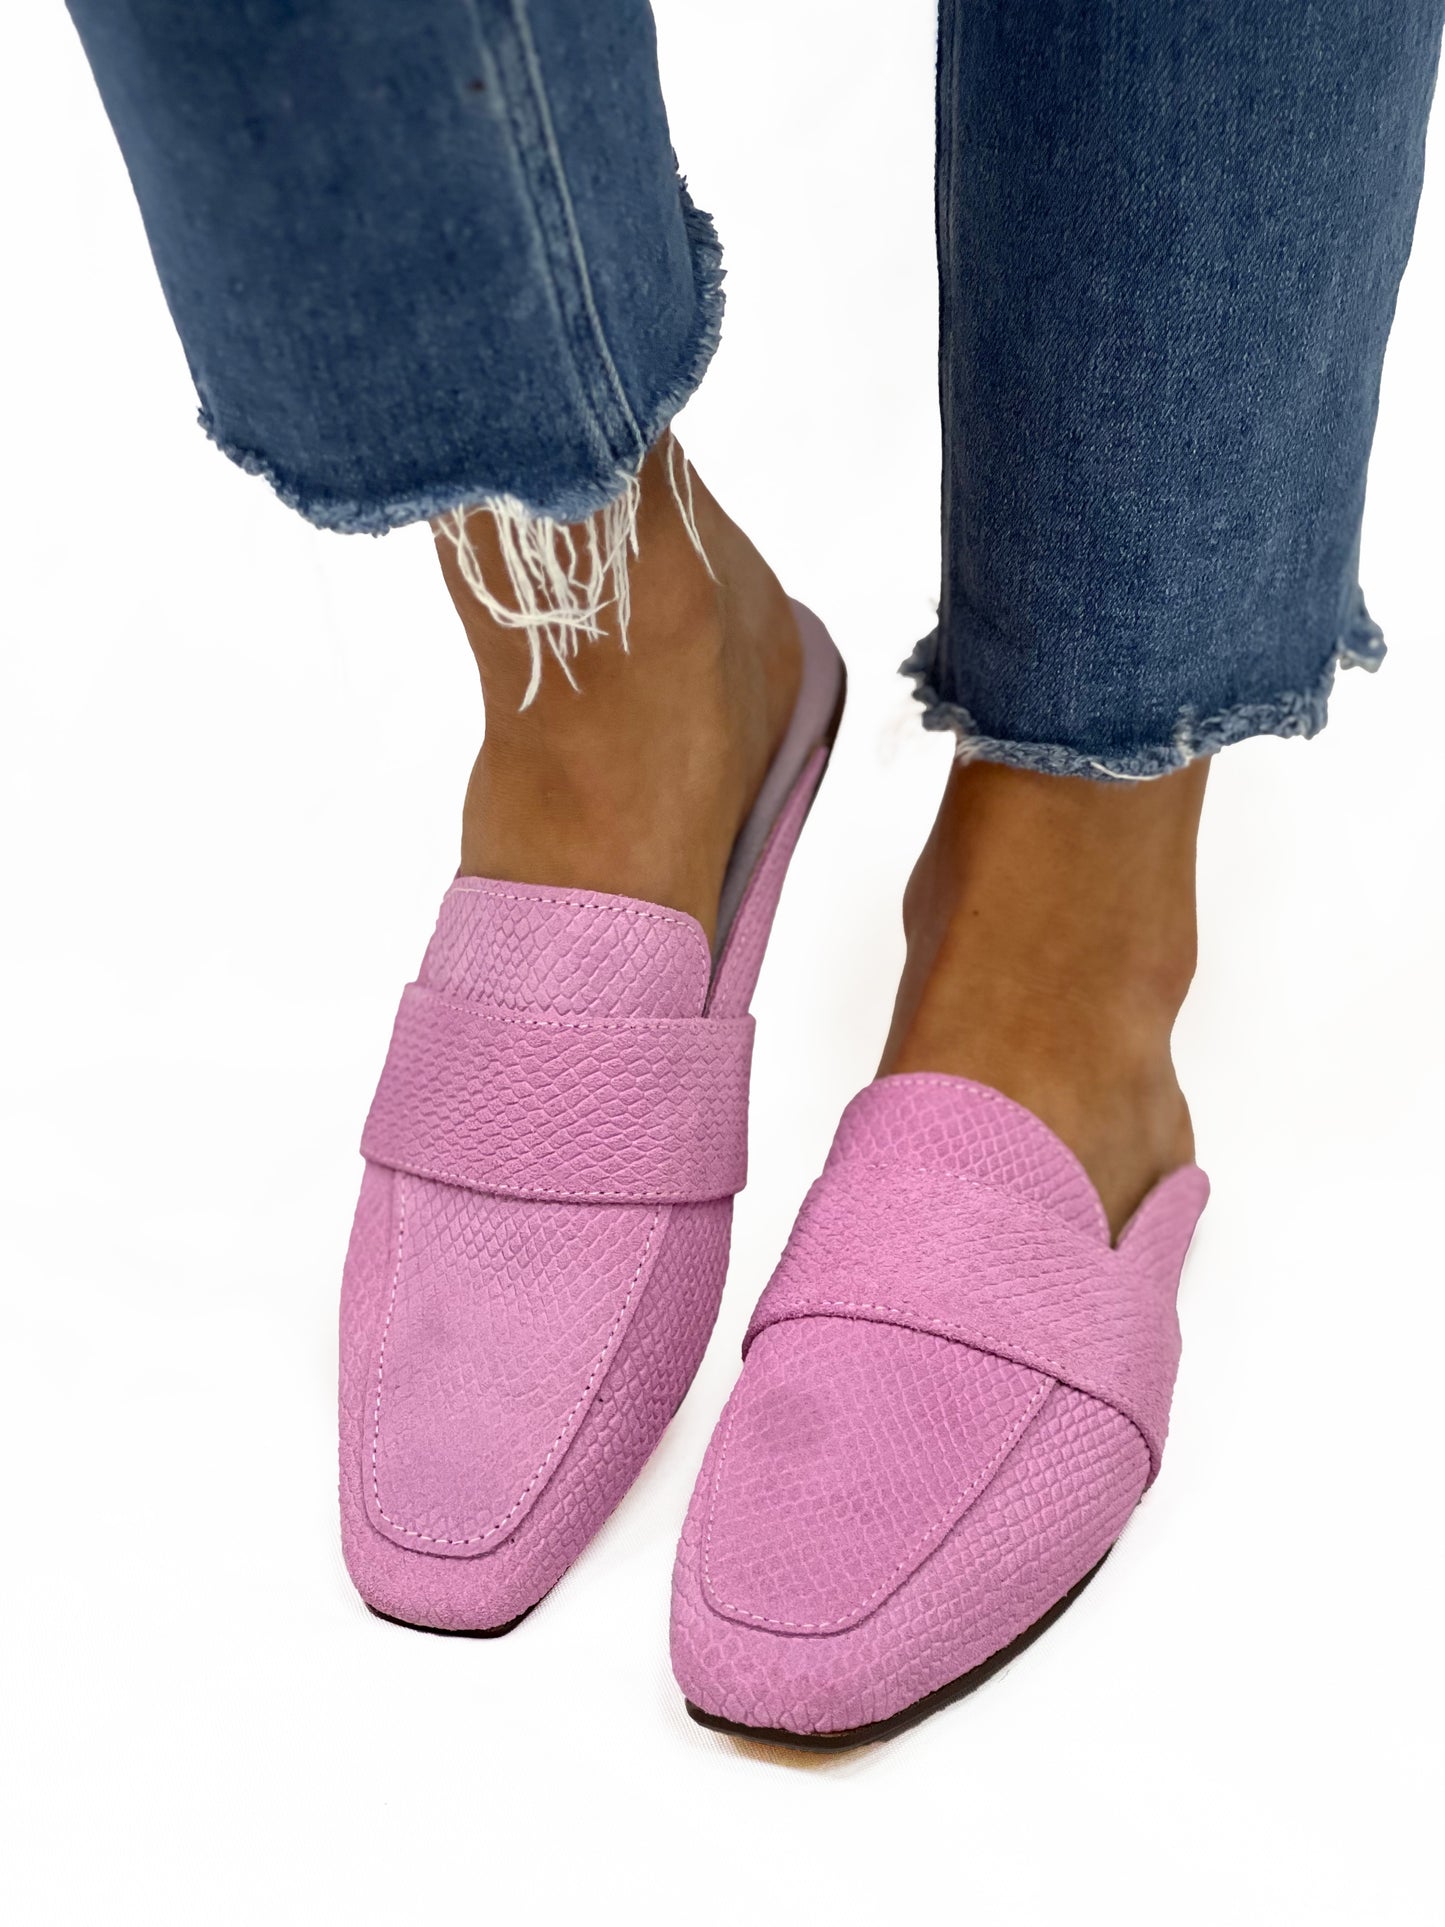 AT EASE LOAFER 2.0 in Thistle Pink